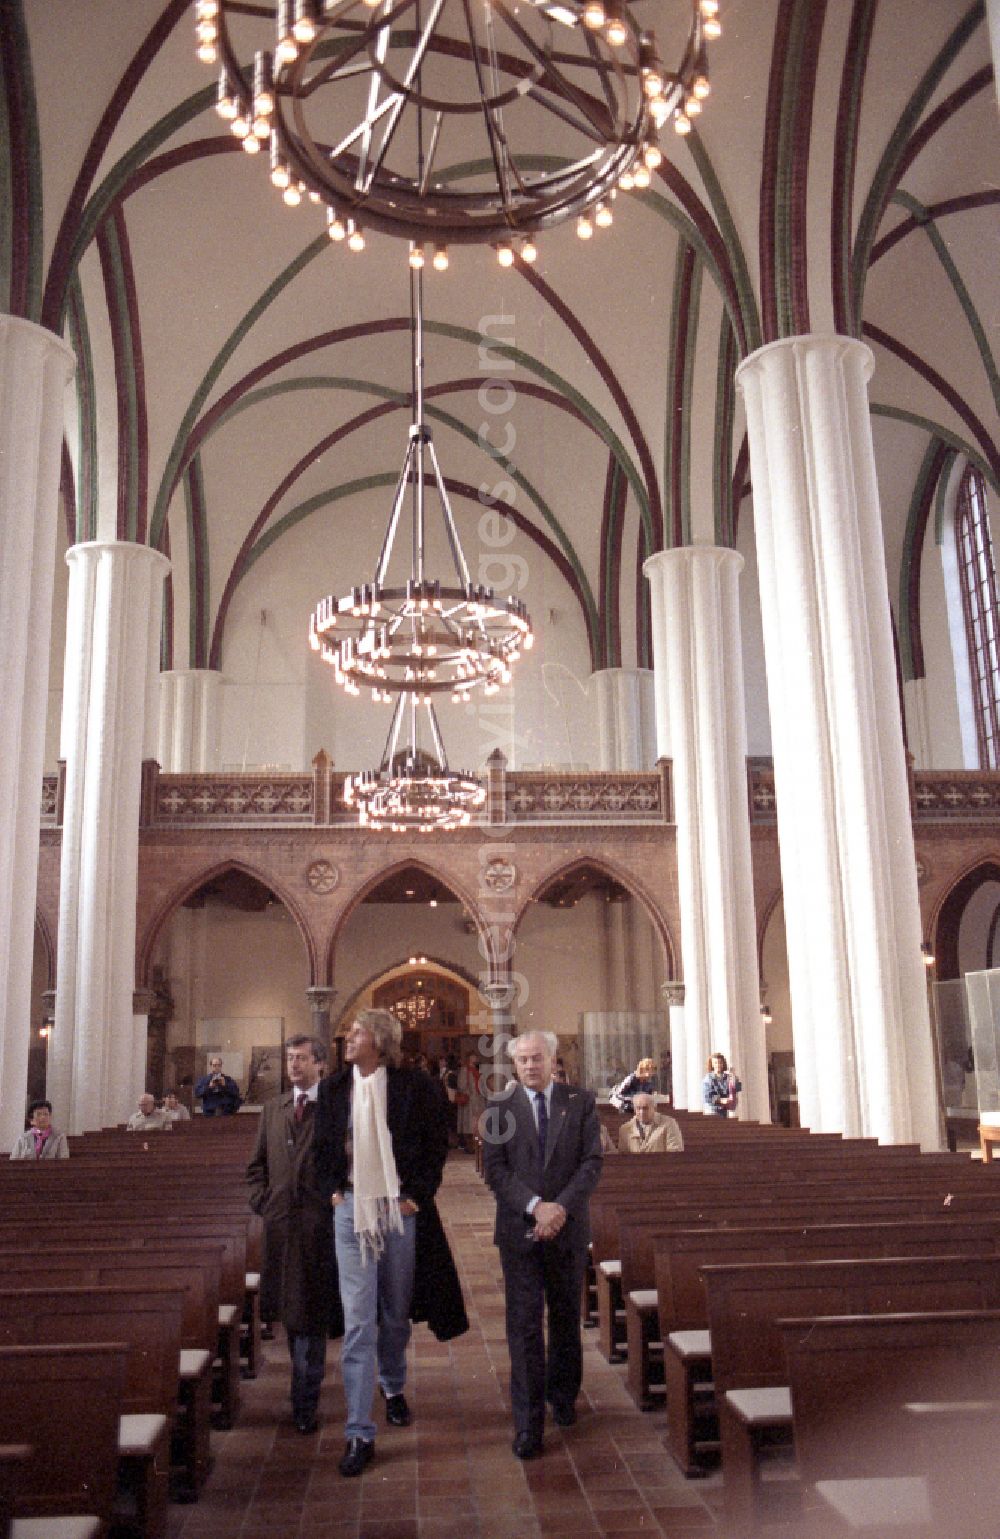 GDR picture archive: Berlin - Pop singer Roland Kaiser visits St. Nicholas Church in Berlin Eastberlin on the territory of the former GDR, German Democratic Republic